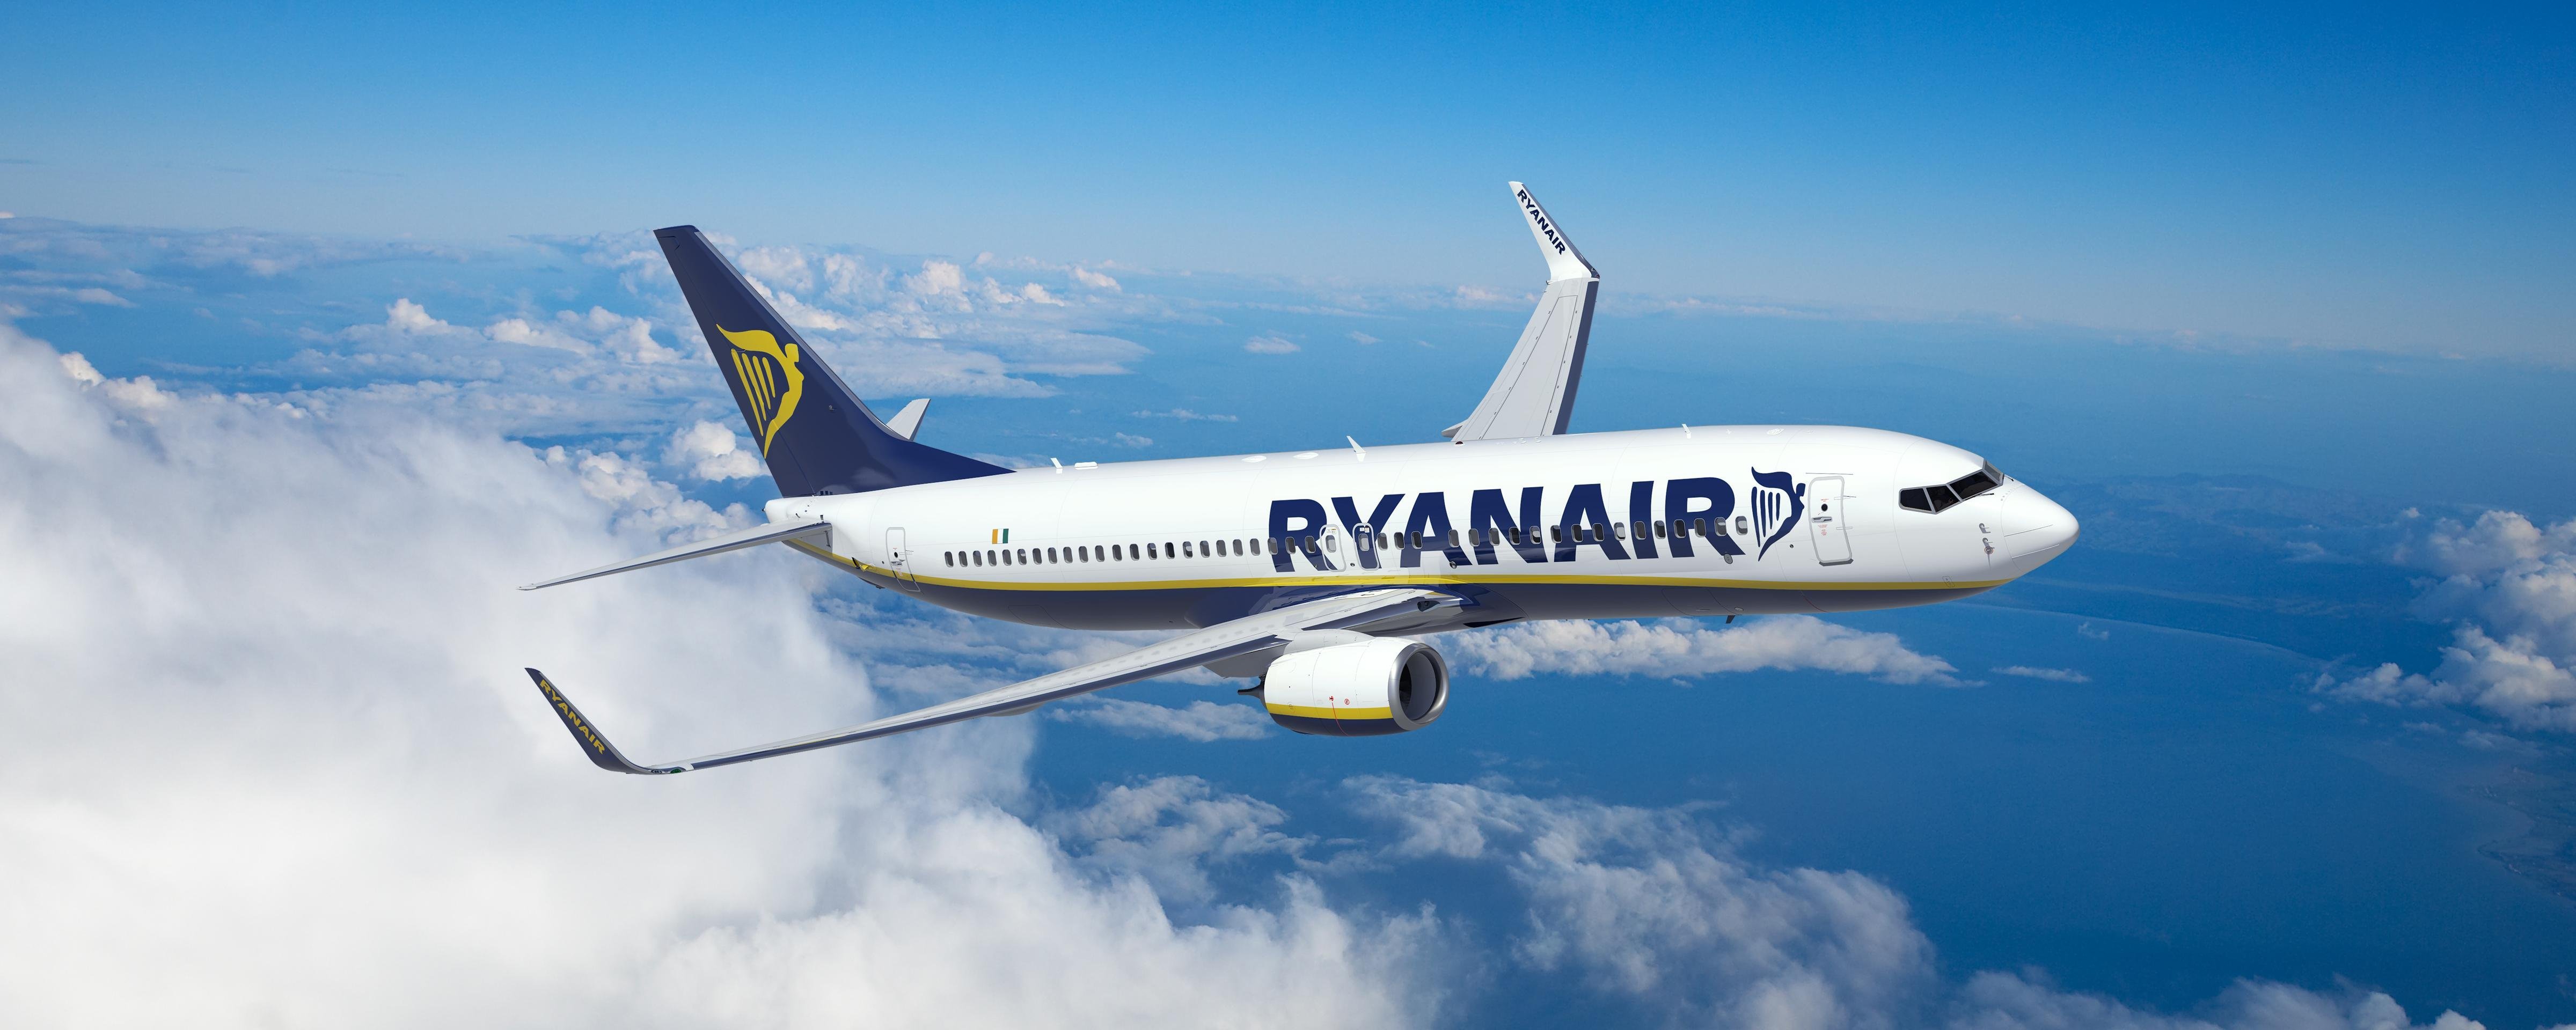 European airline Ryanair is reducing its checked baggage fees -- just in time for the busy summer travel season.